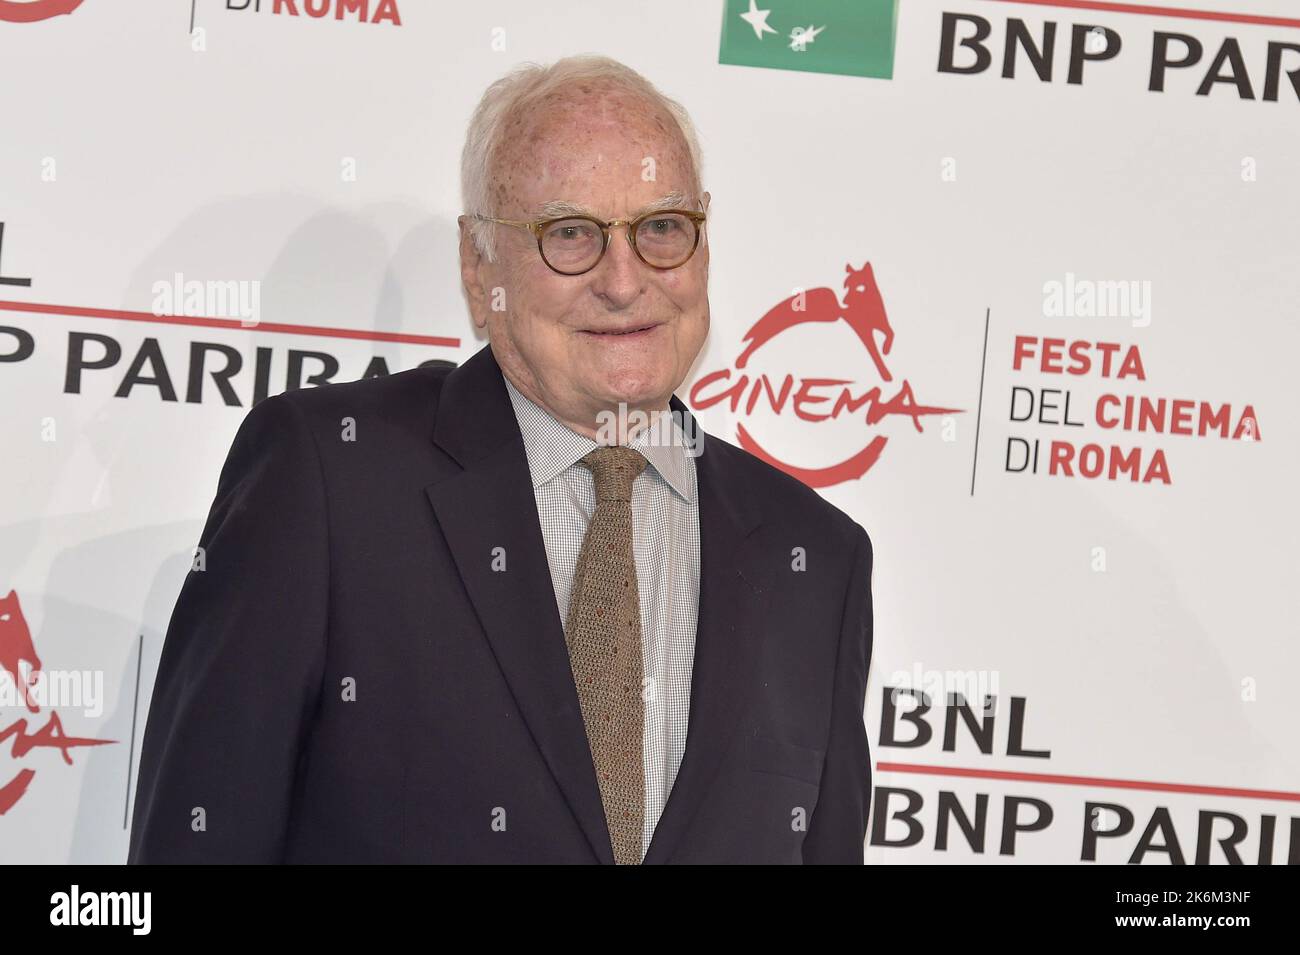 James francis ivory hi-res stock photography and images image